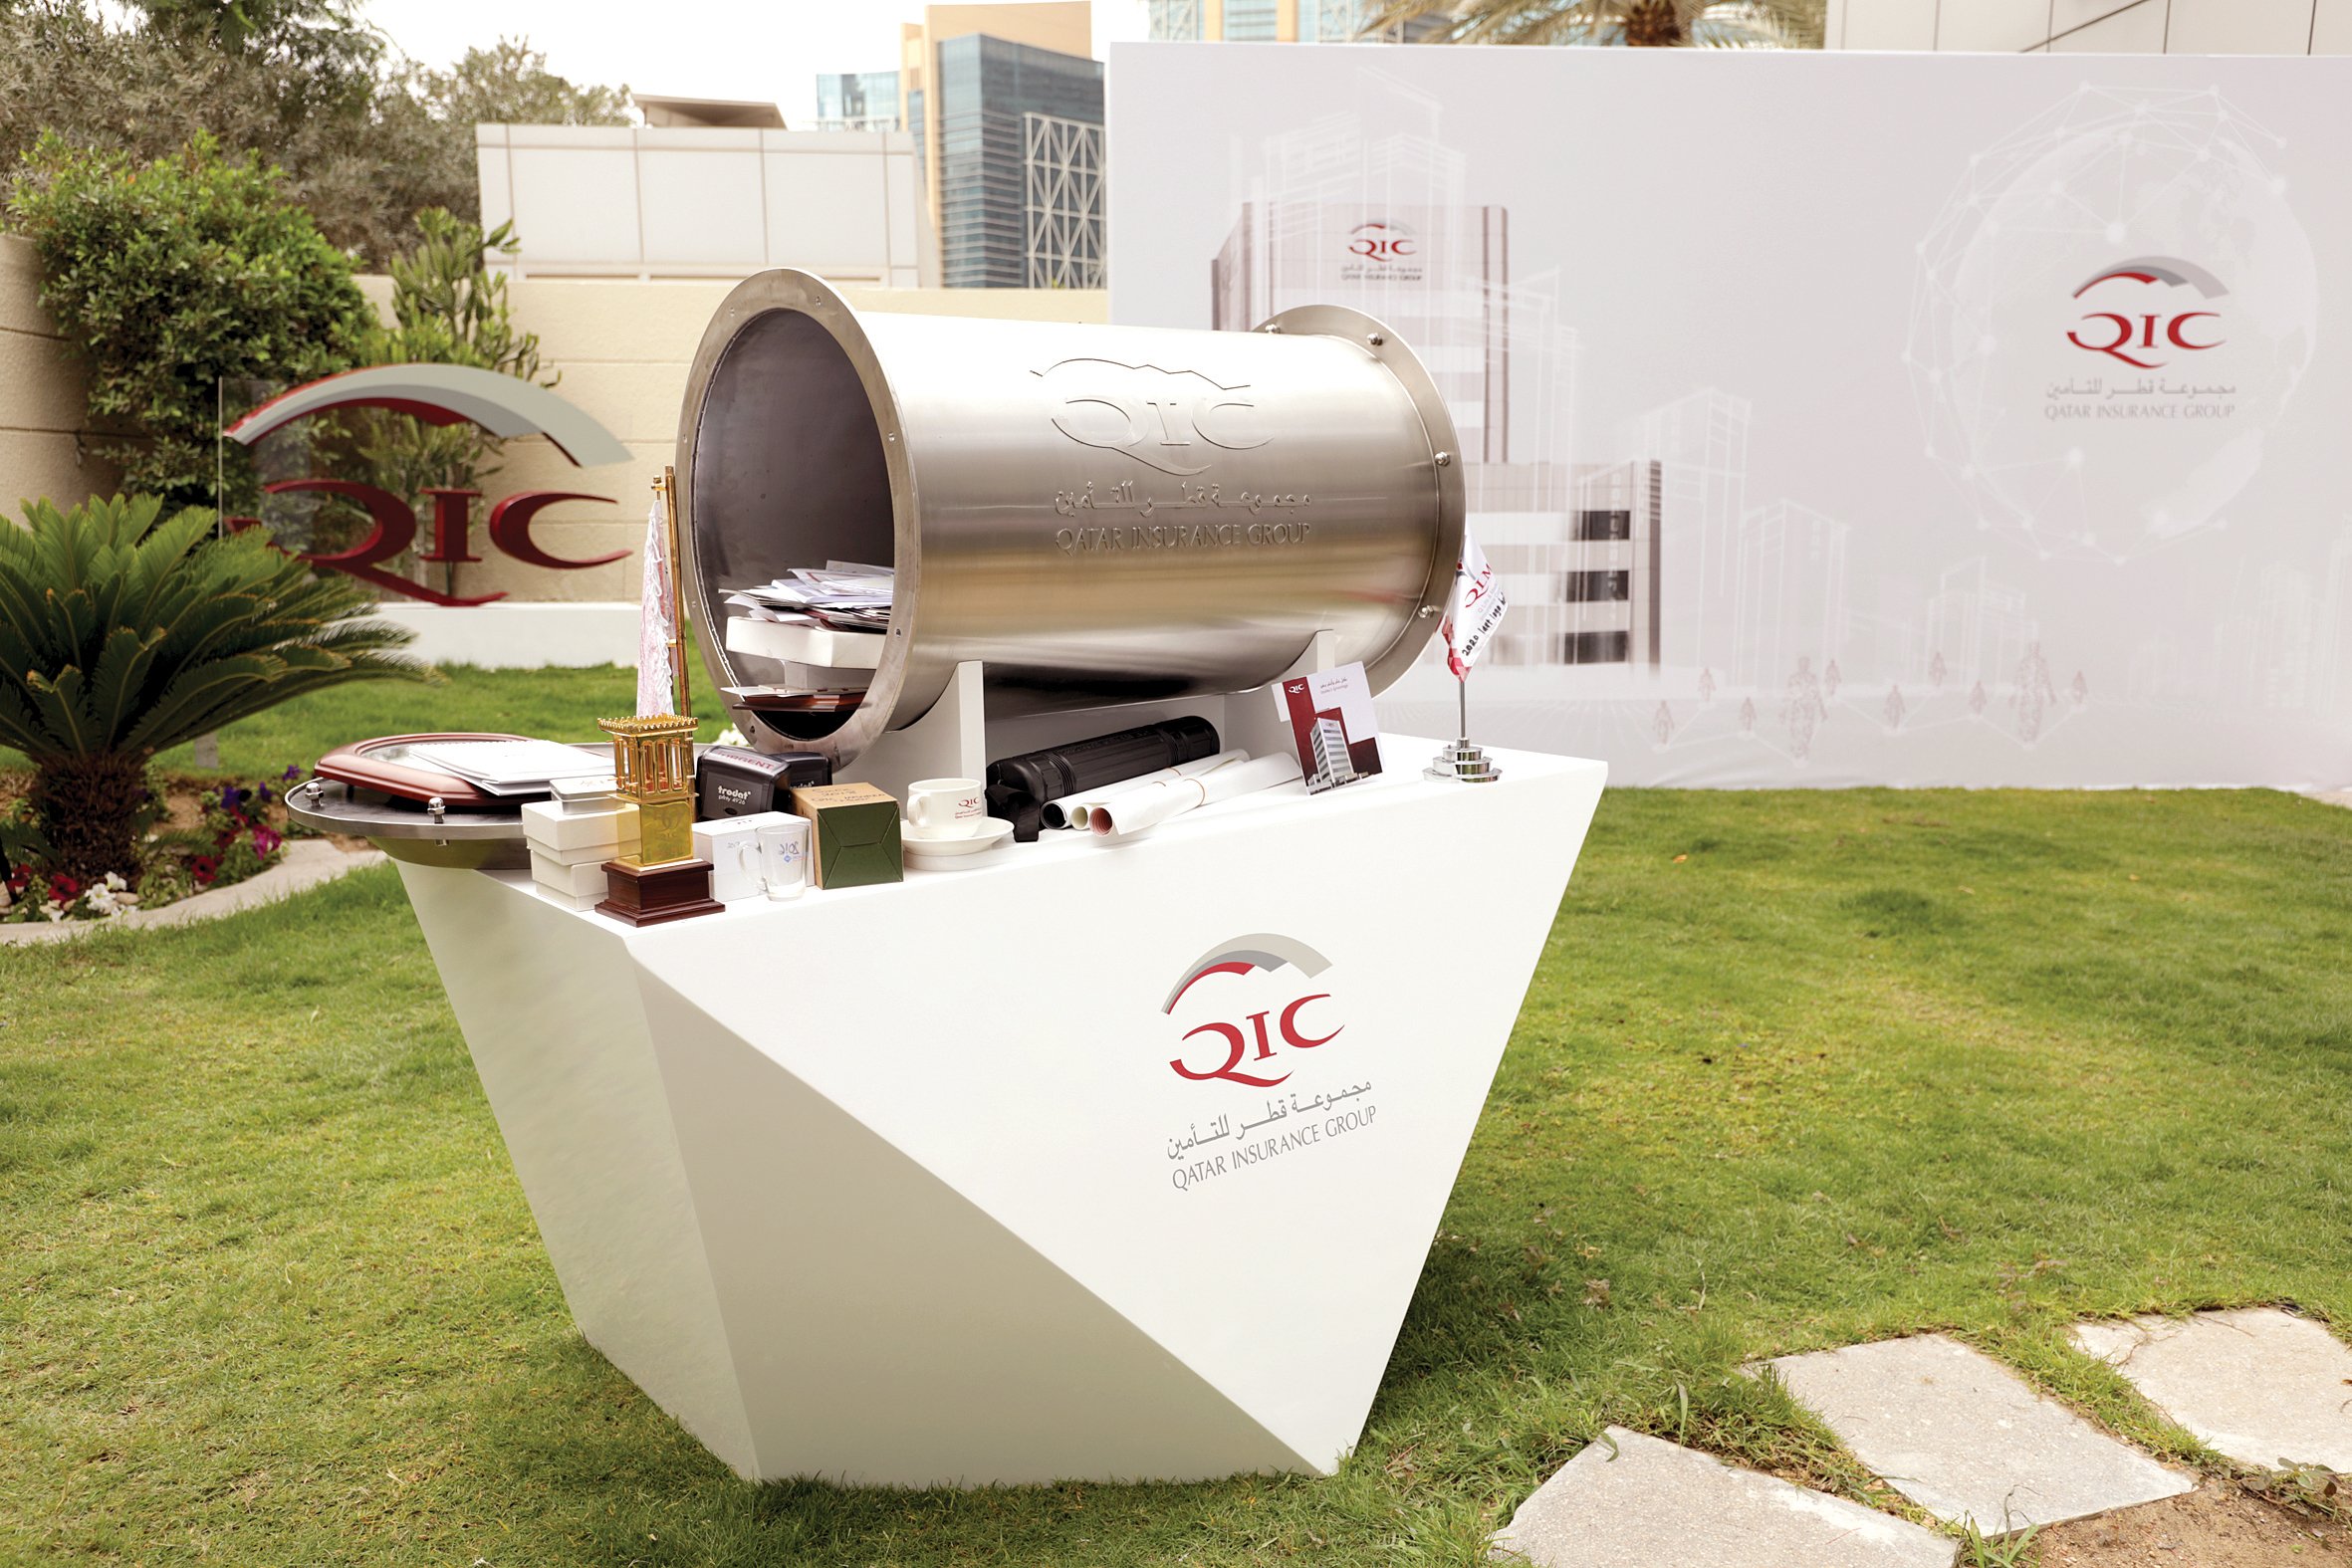 QIC holds ‘Time Capsule’ event .. It will remain buried until 2064